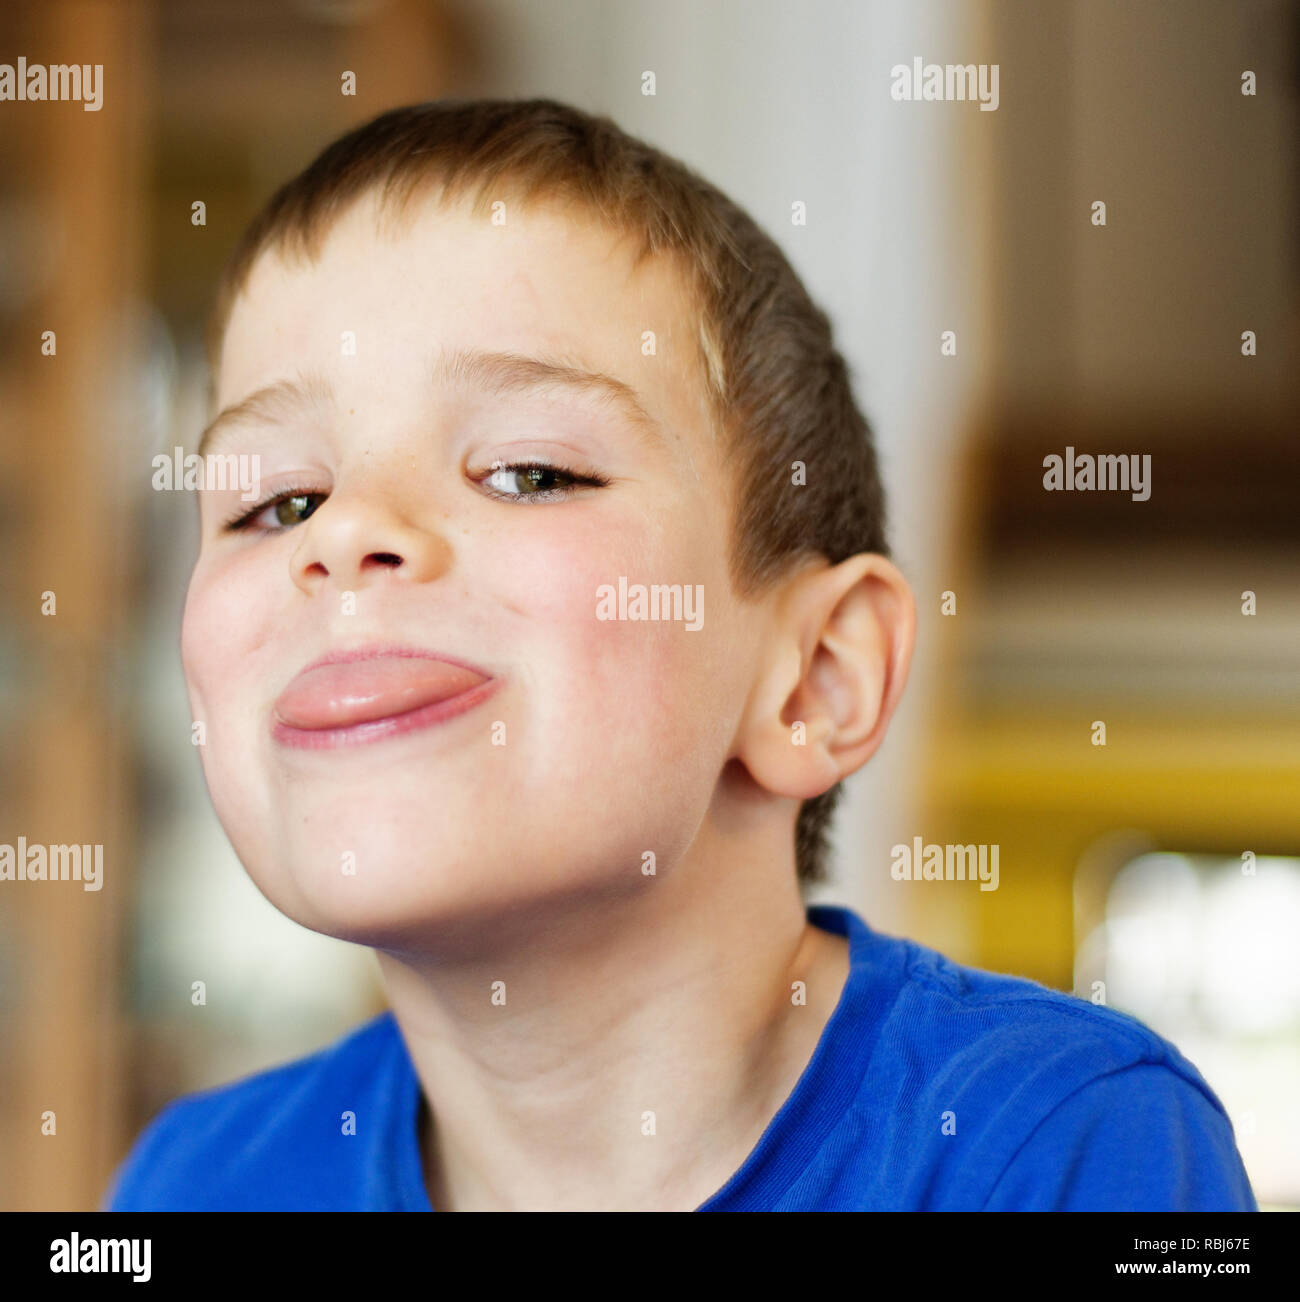 A young boy (6 yrs old) pulling faces at the camera Stock Photo